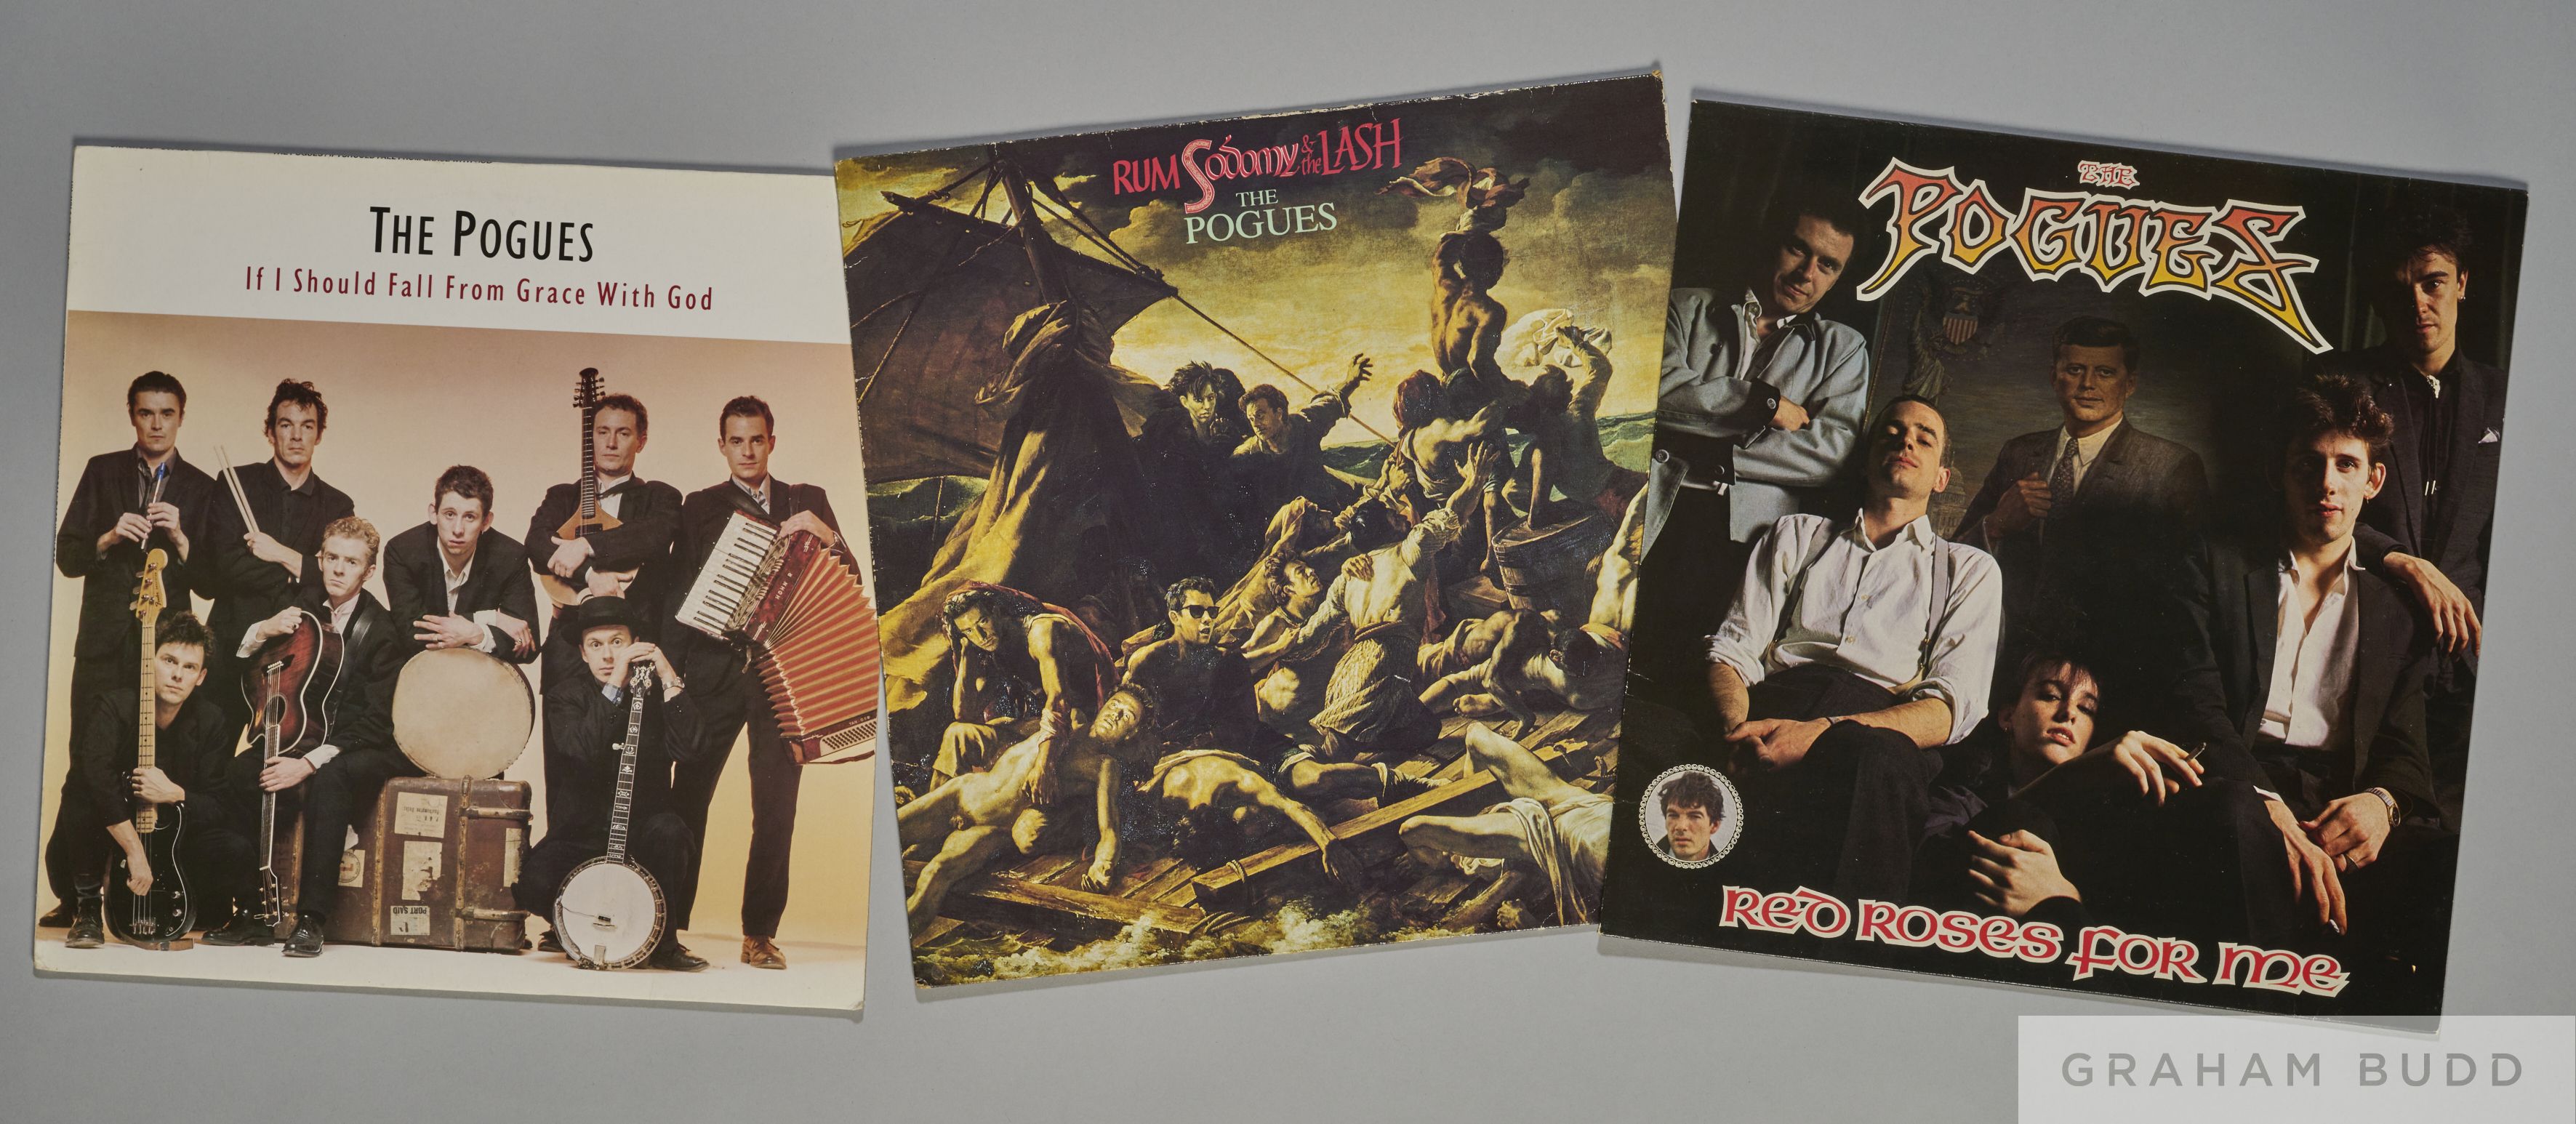 Three first pressing albums by The Pogues